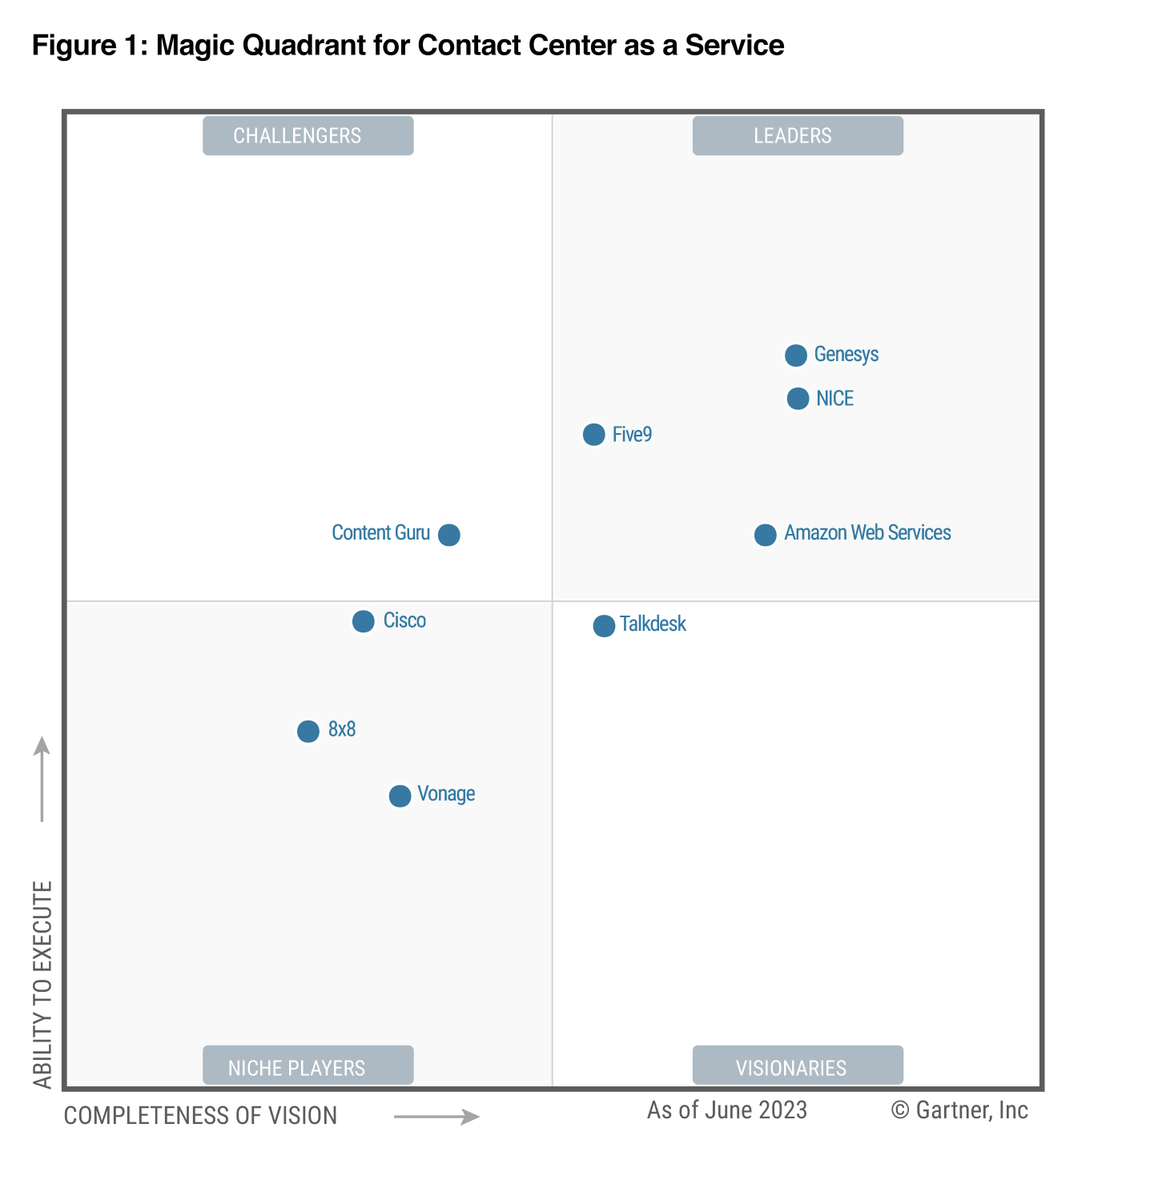 .@Five9 named a Leader in the 2023 Gartner Magic Quadrant for Contact Center as a Service < What many #CCaaS followers have been waiting for - a link to the Gartner Magic Quadrant for Contact Center as a Service.#CCaaS five9.com/landing/gartner